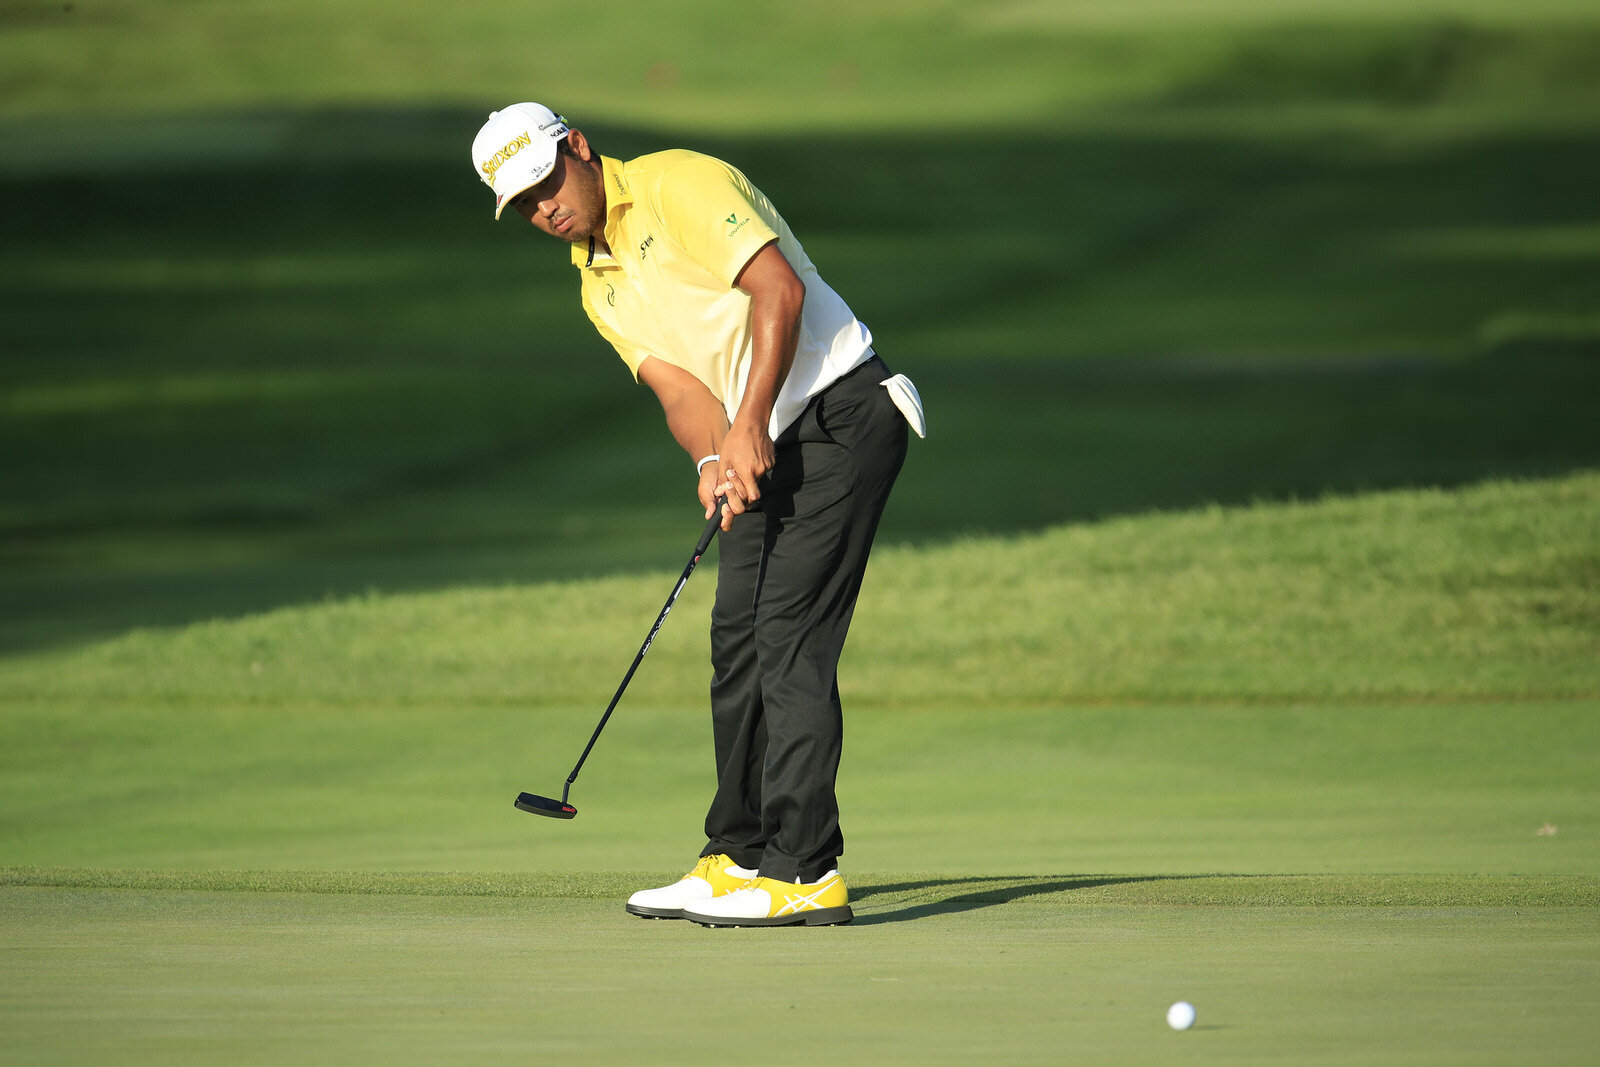  OLYMPIA FIELDS, ILLINOIS - AUGUST 27: Hideki Matsuyama of Japan putts for birdie on the eighth hole during the first round of the BMW Championship on the North Course at Olympia Fields Country Club on August 27, 2020 in Olympia Fields, Illinois. (Ph